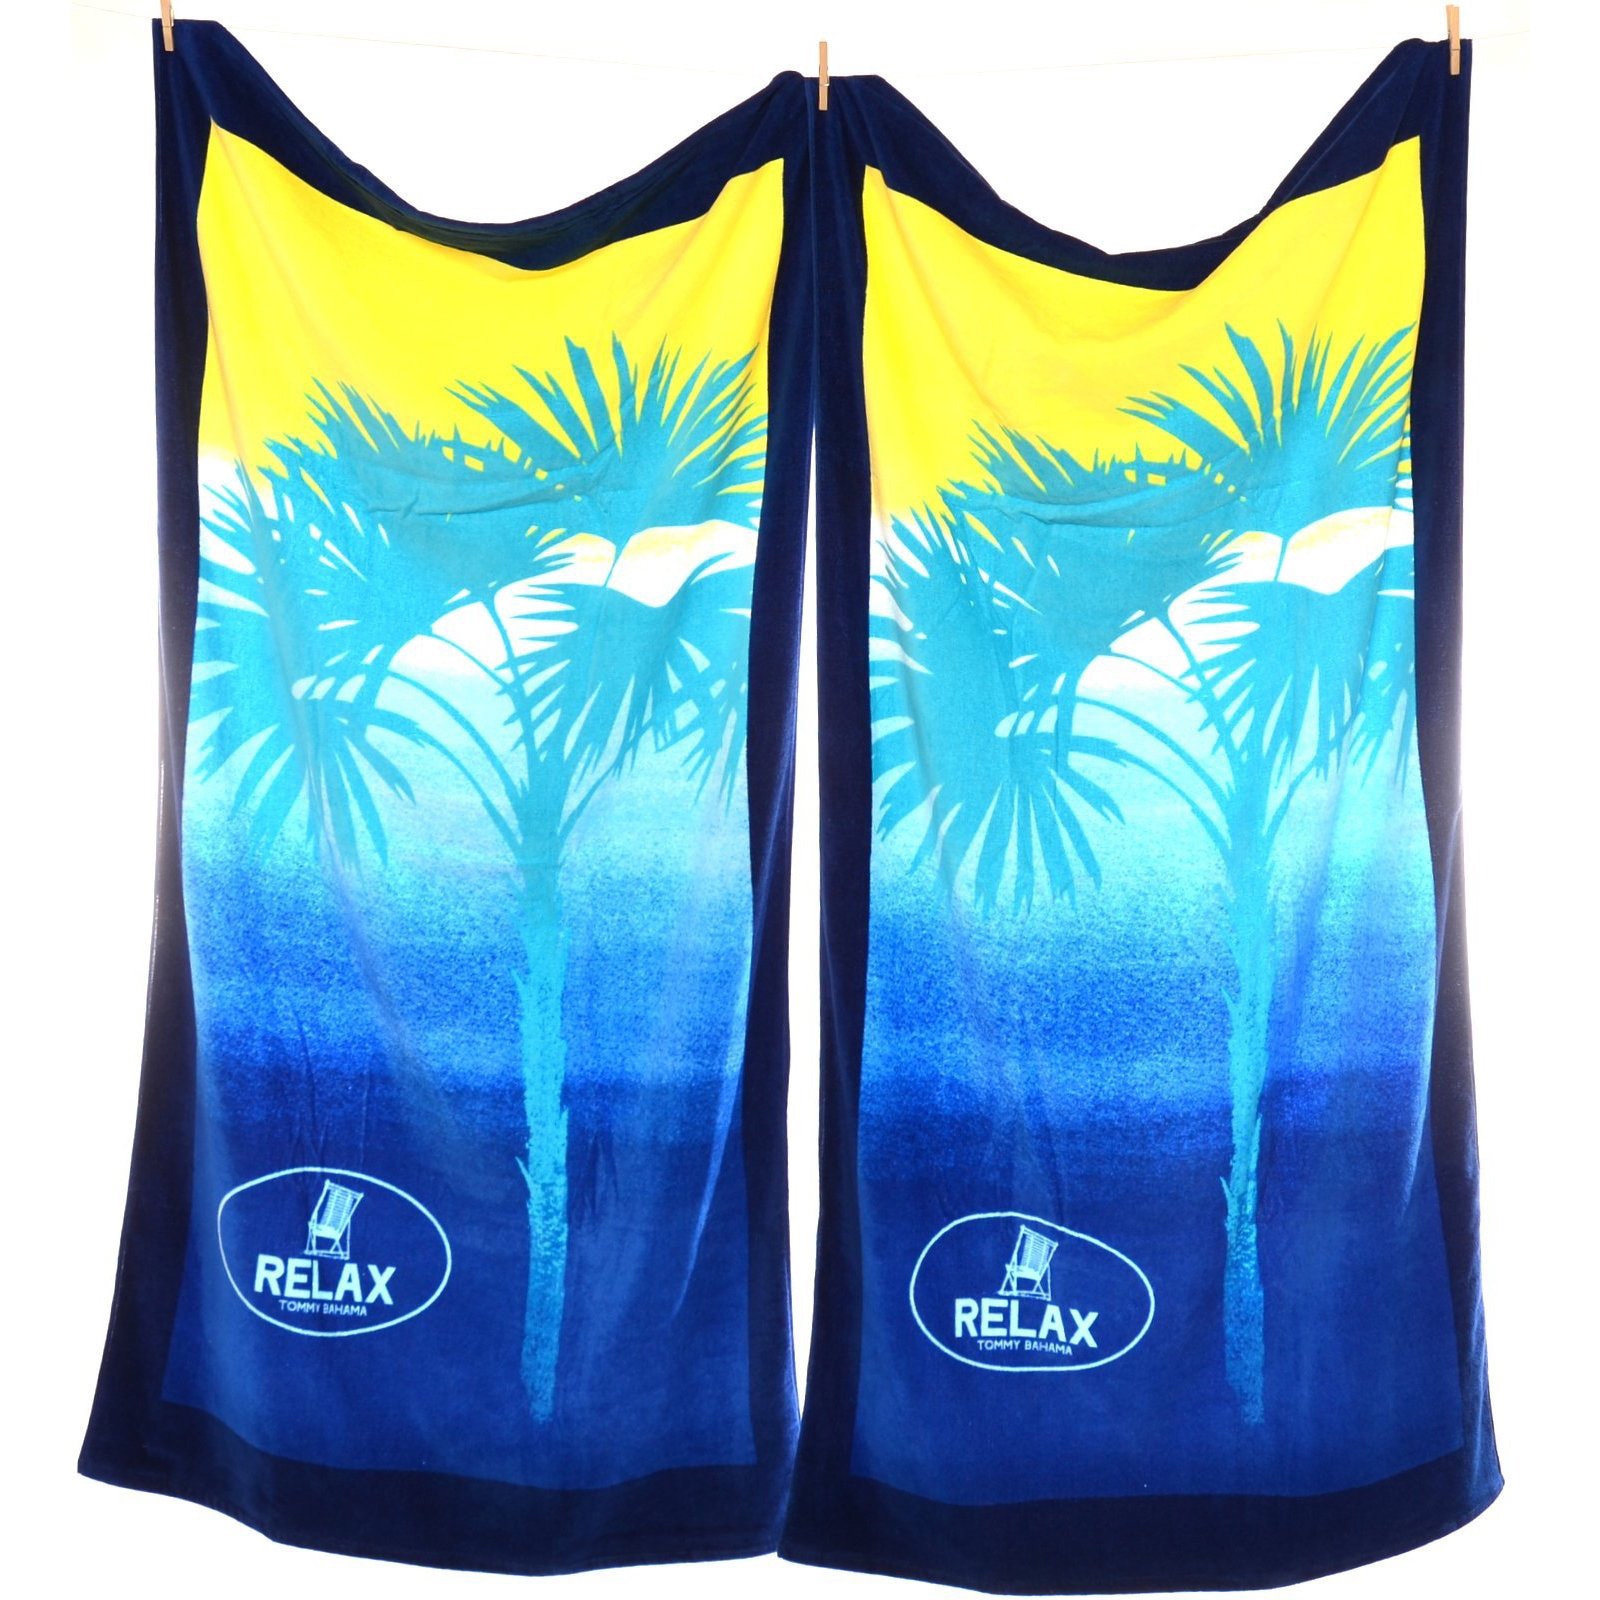 Tommy Bahama Ombre Palm Beach Towel (set Of 2) (Yellow/blue/aquaMaterials 100 percent cottonCare instructions Machine washableDimensions 35 inches wide x 66 inches longThe digital images we display have the most accurate color possible. However, due to